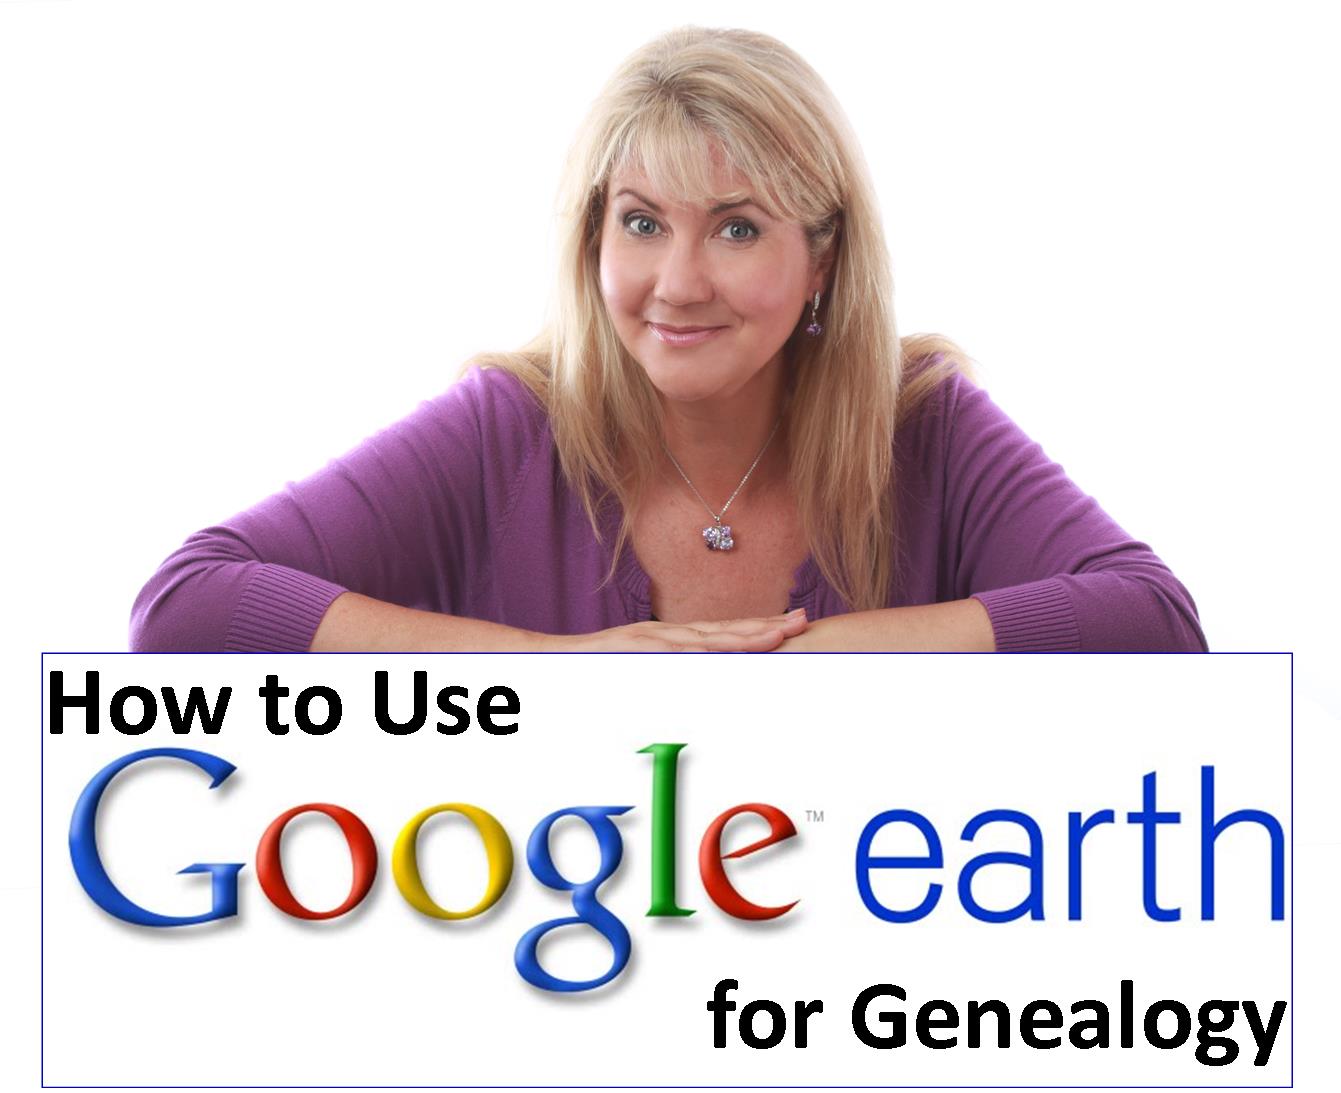 Google Earth Pro for genealogy with Lisa Louise Cooke